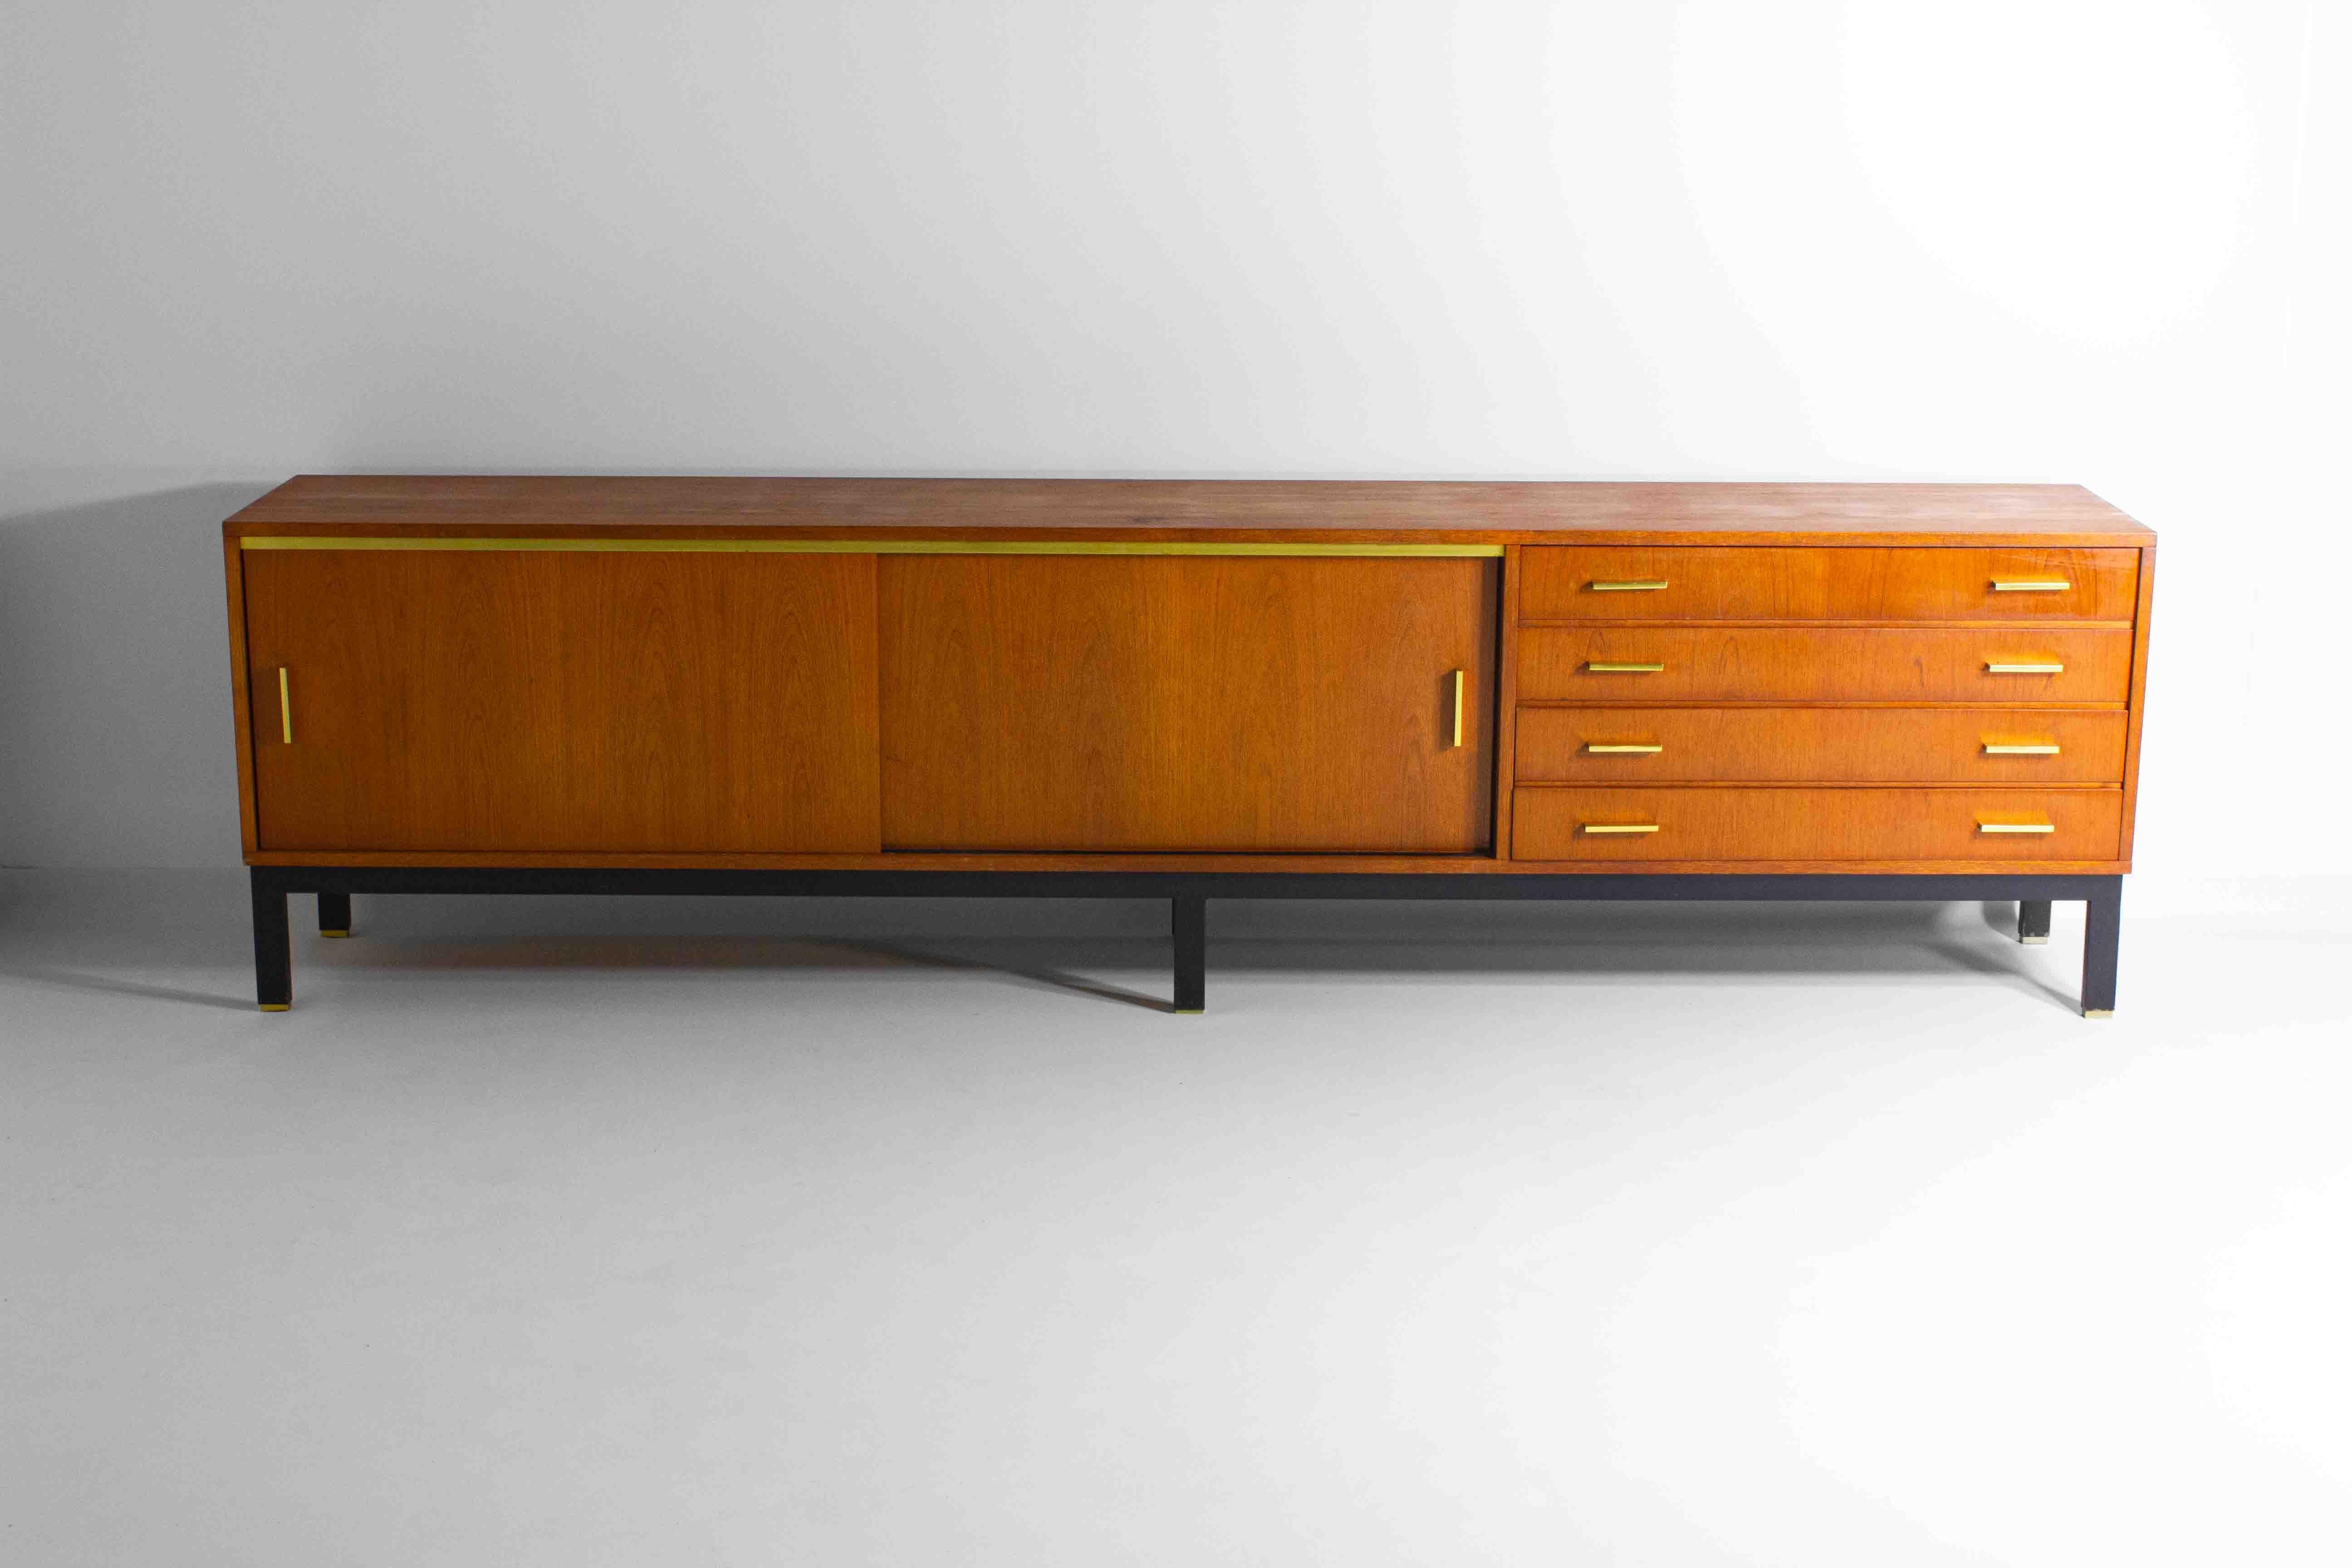 This sleek extra large sideboard is a typical mid-century beauty. Adorned in premium teak and finished with beautiful golden handles, sabots and sliding bars. The firm wooden corpus rests on a black metal base.